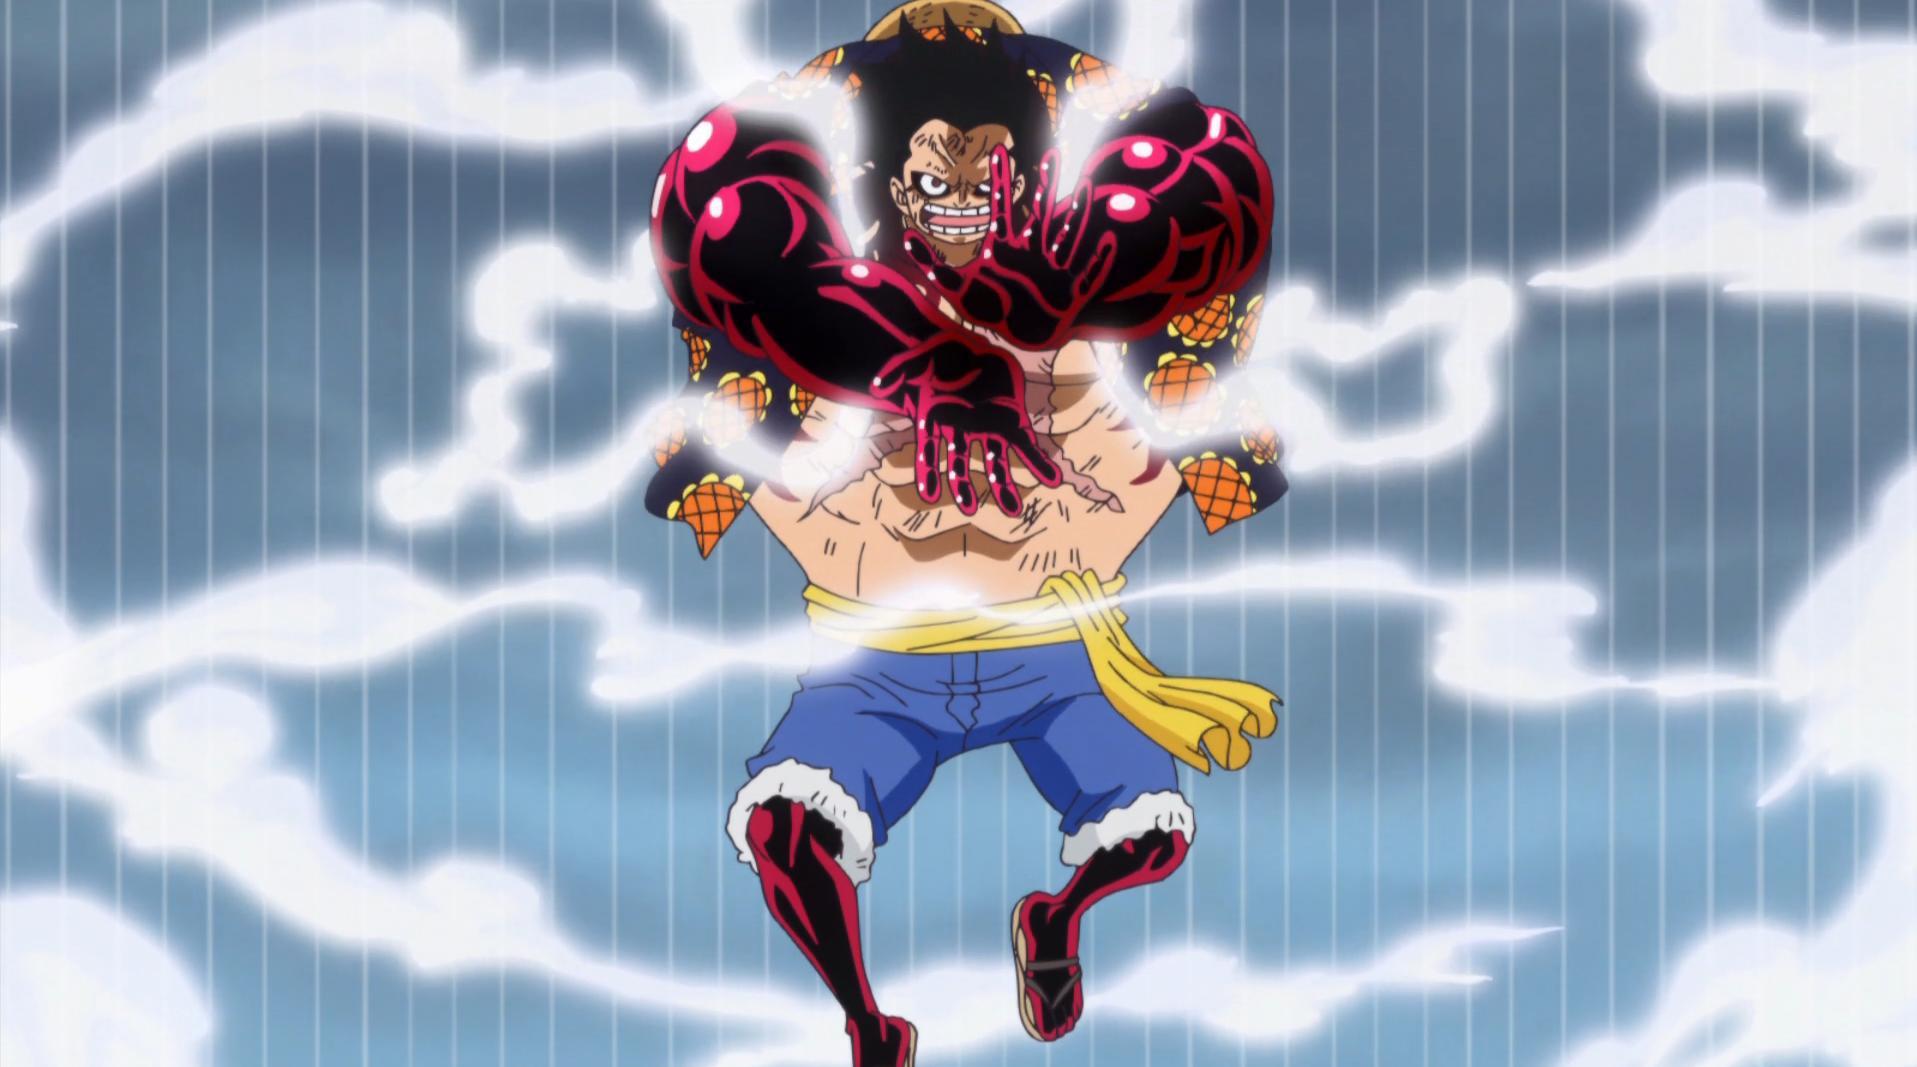 Luffy Gear Fourth Wallpapers - Wallpaper Cave from wallpapercave.com. 